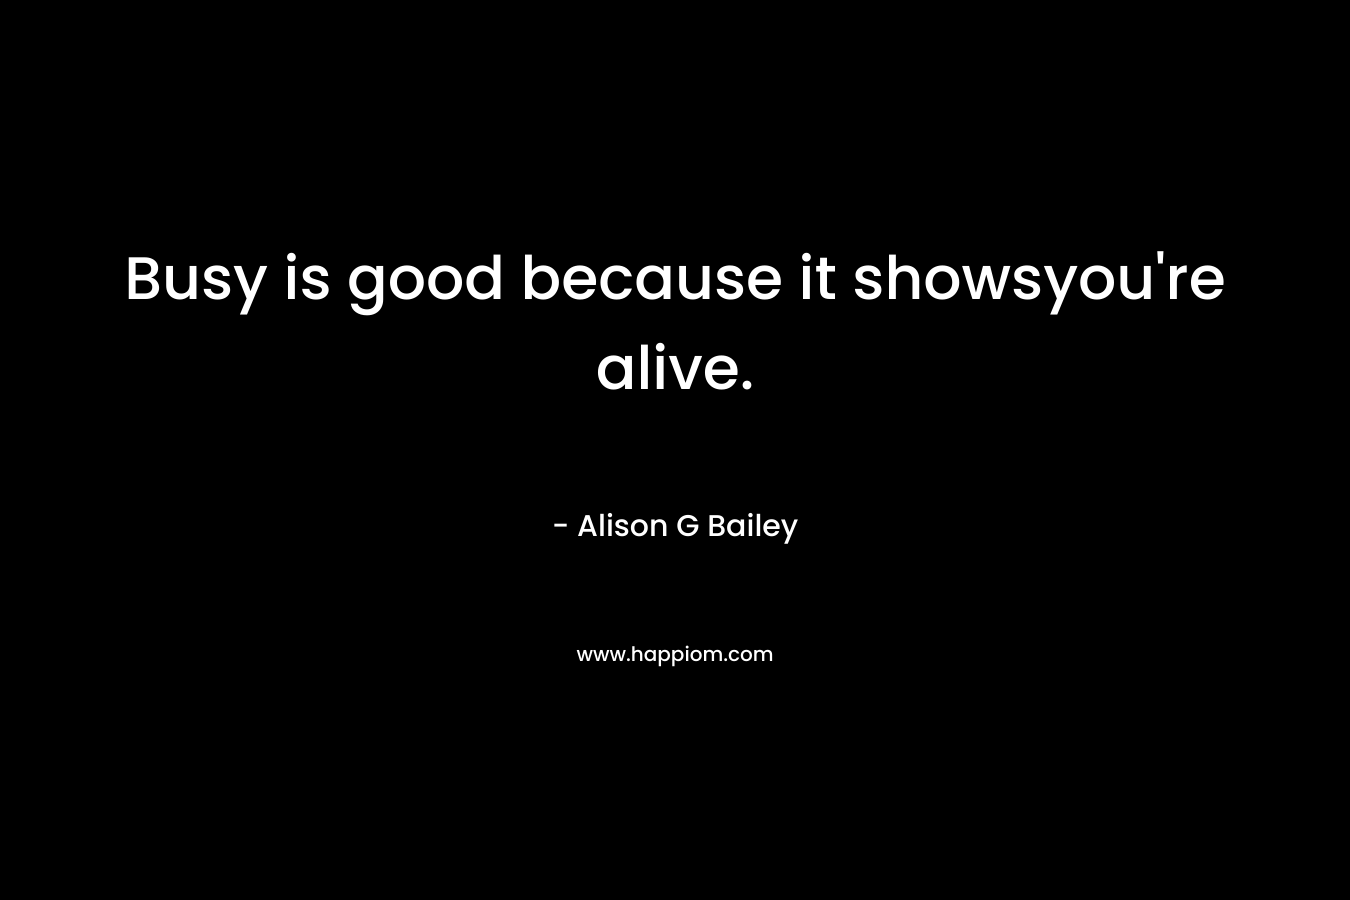 Busy is good because it showsyou’re alive. – Alison G Bailey